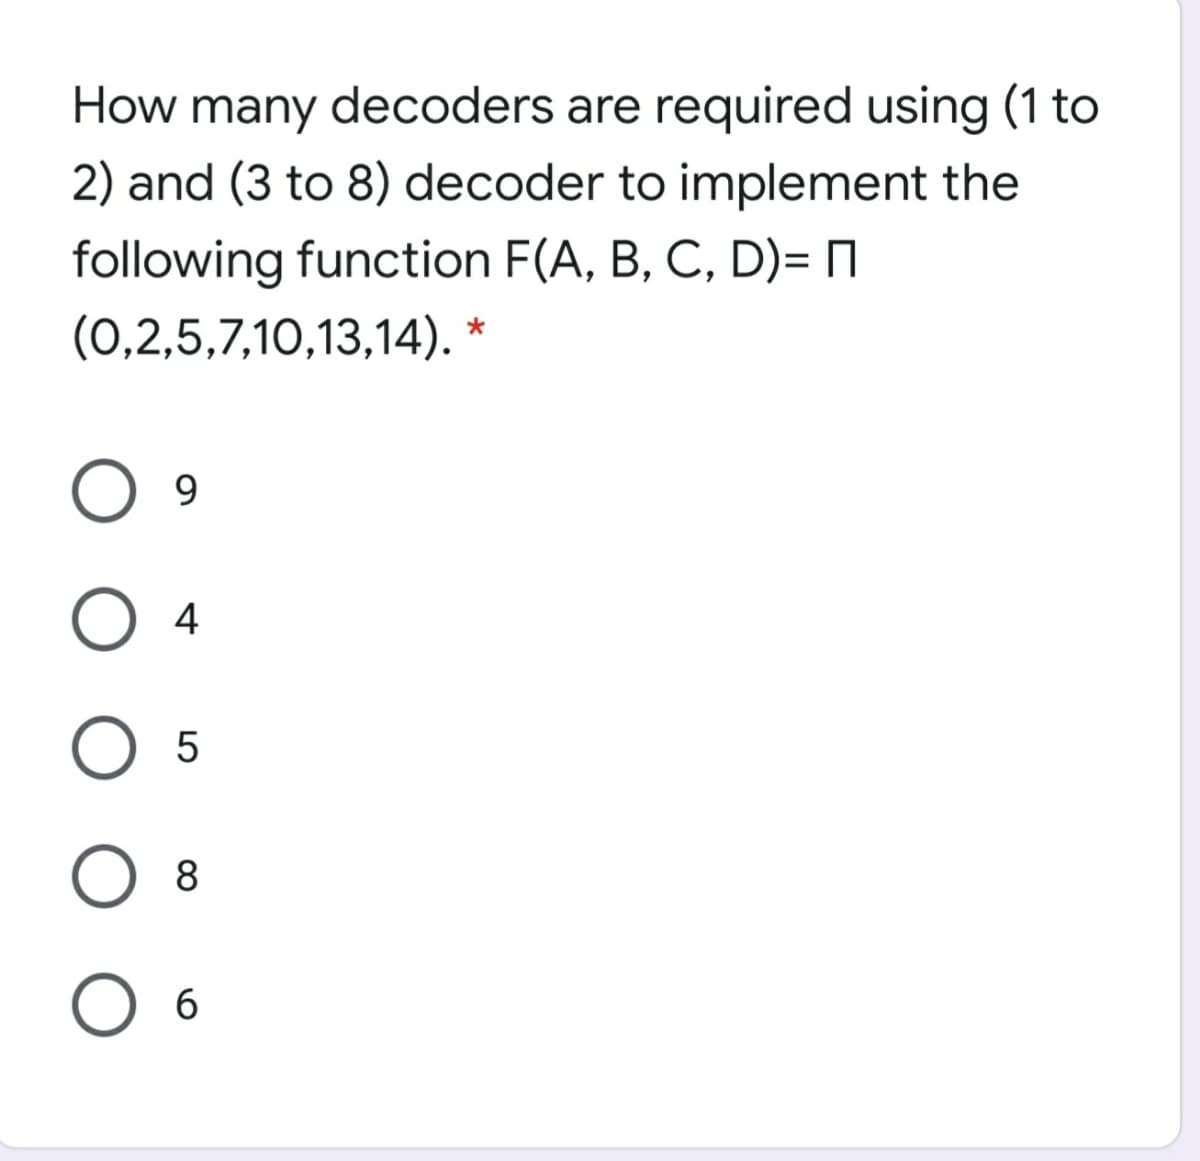 How many decoders are required using (1 to
2) and (3 to 8) decoder to implement the
following function F(A, B, C, D)= N
(0,2,5,7,10,13,14). *
9.
4
5
8.
